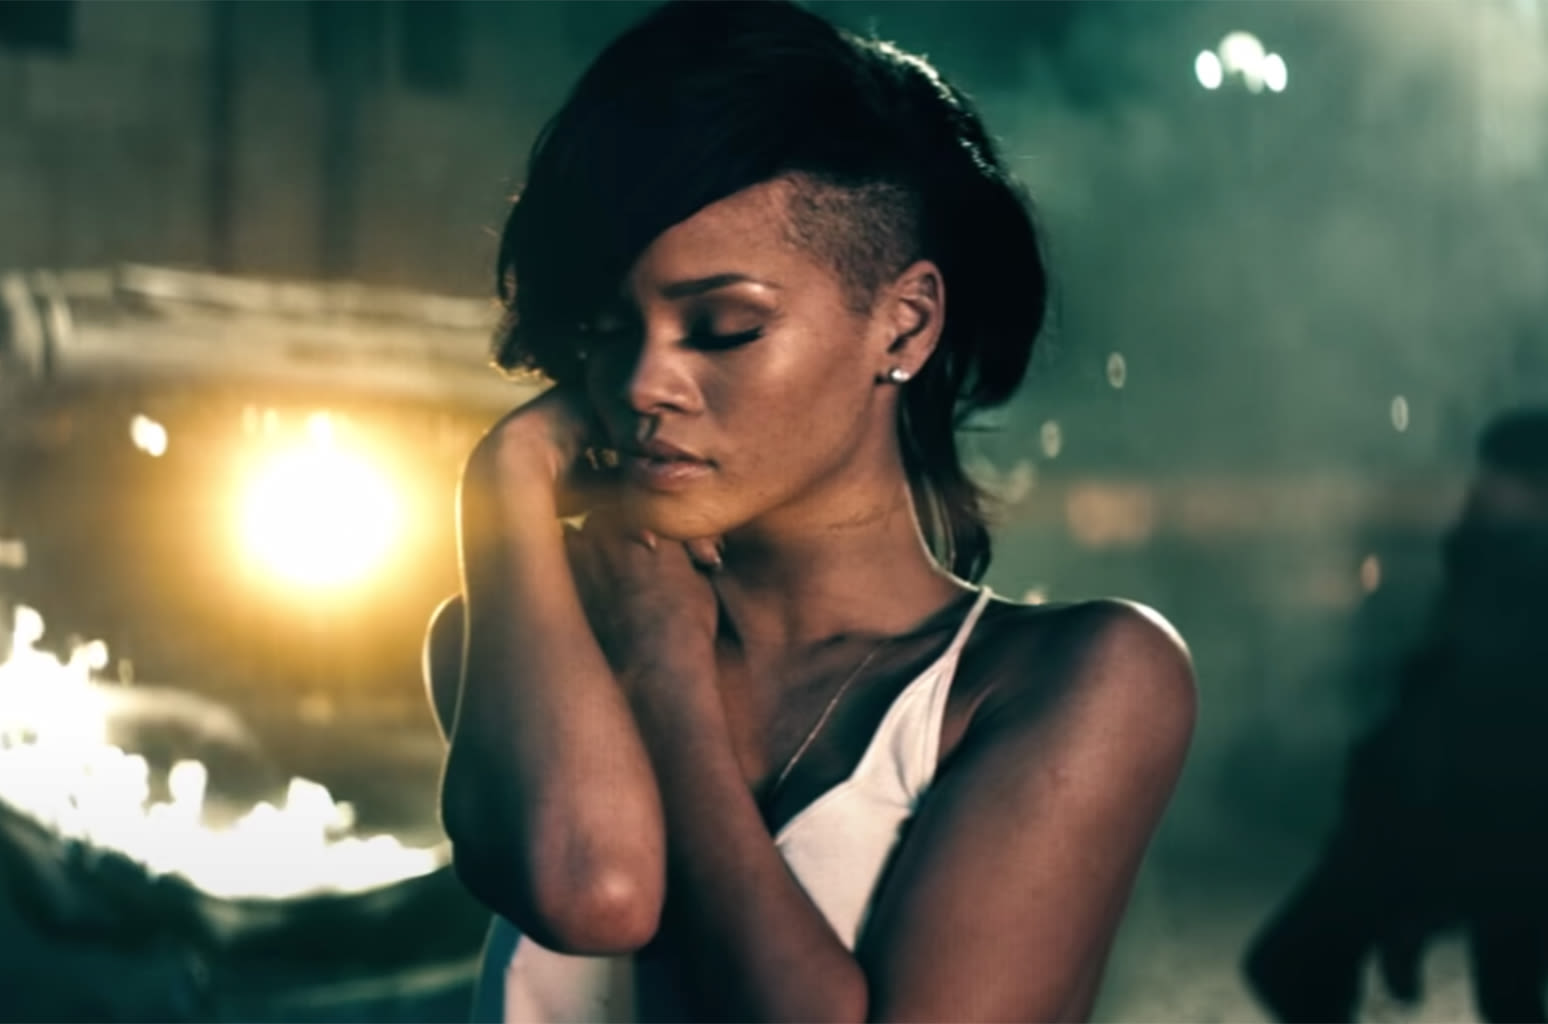 It’s Official: Rihanna’s ‘Diamonds’ Is a Diamond-Certified Record